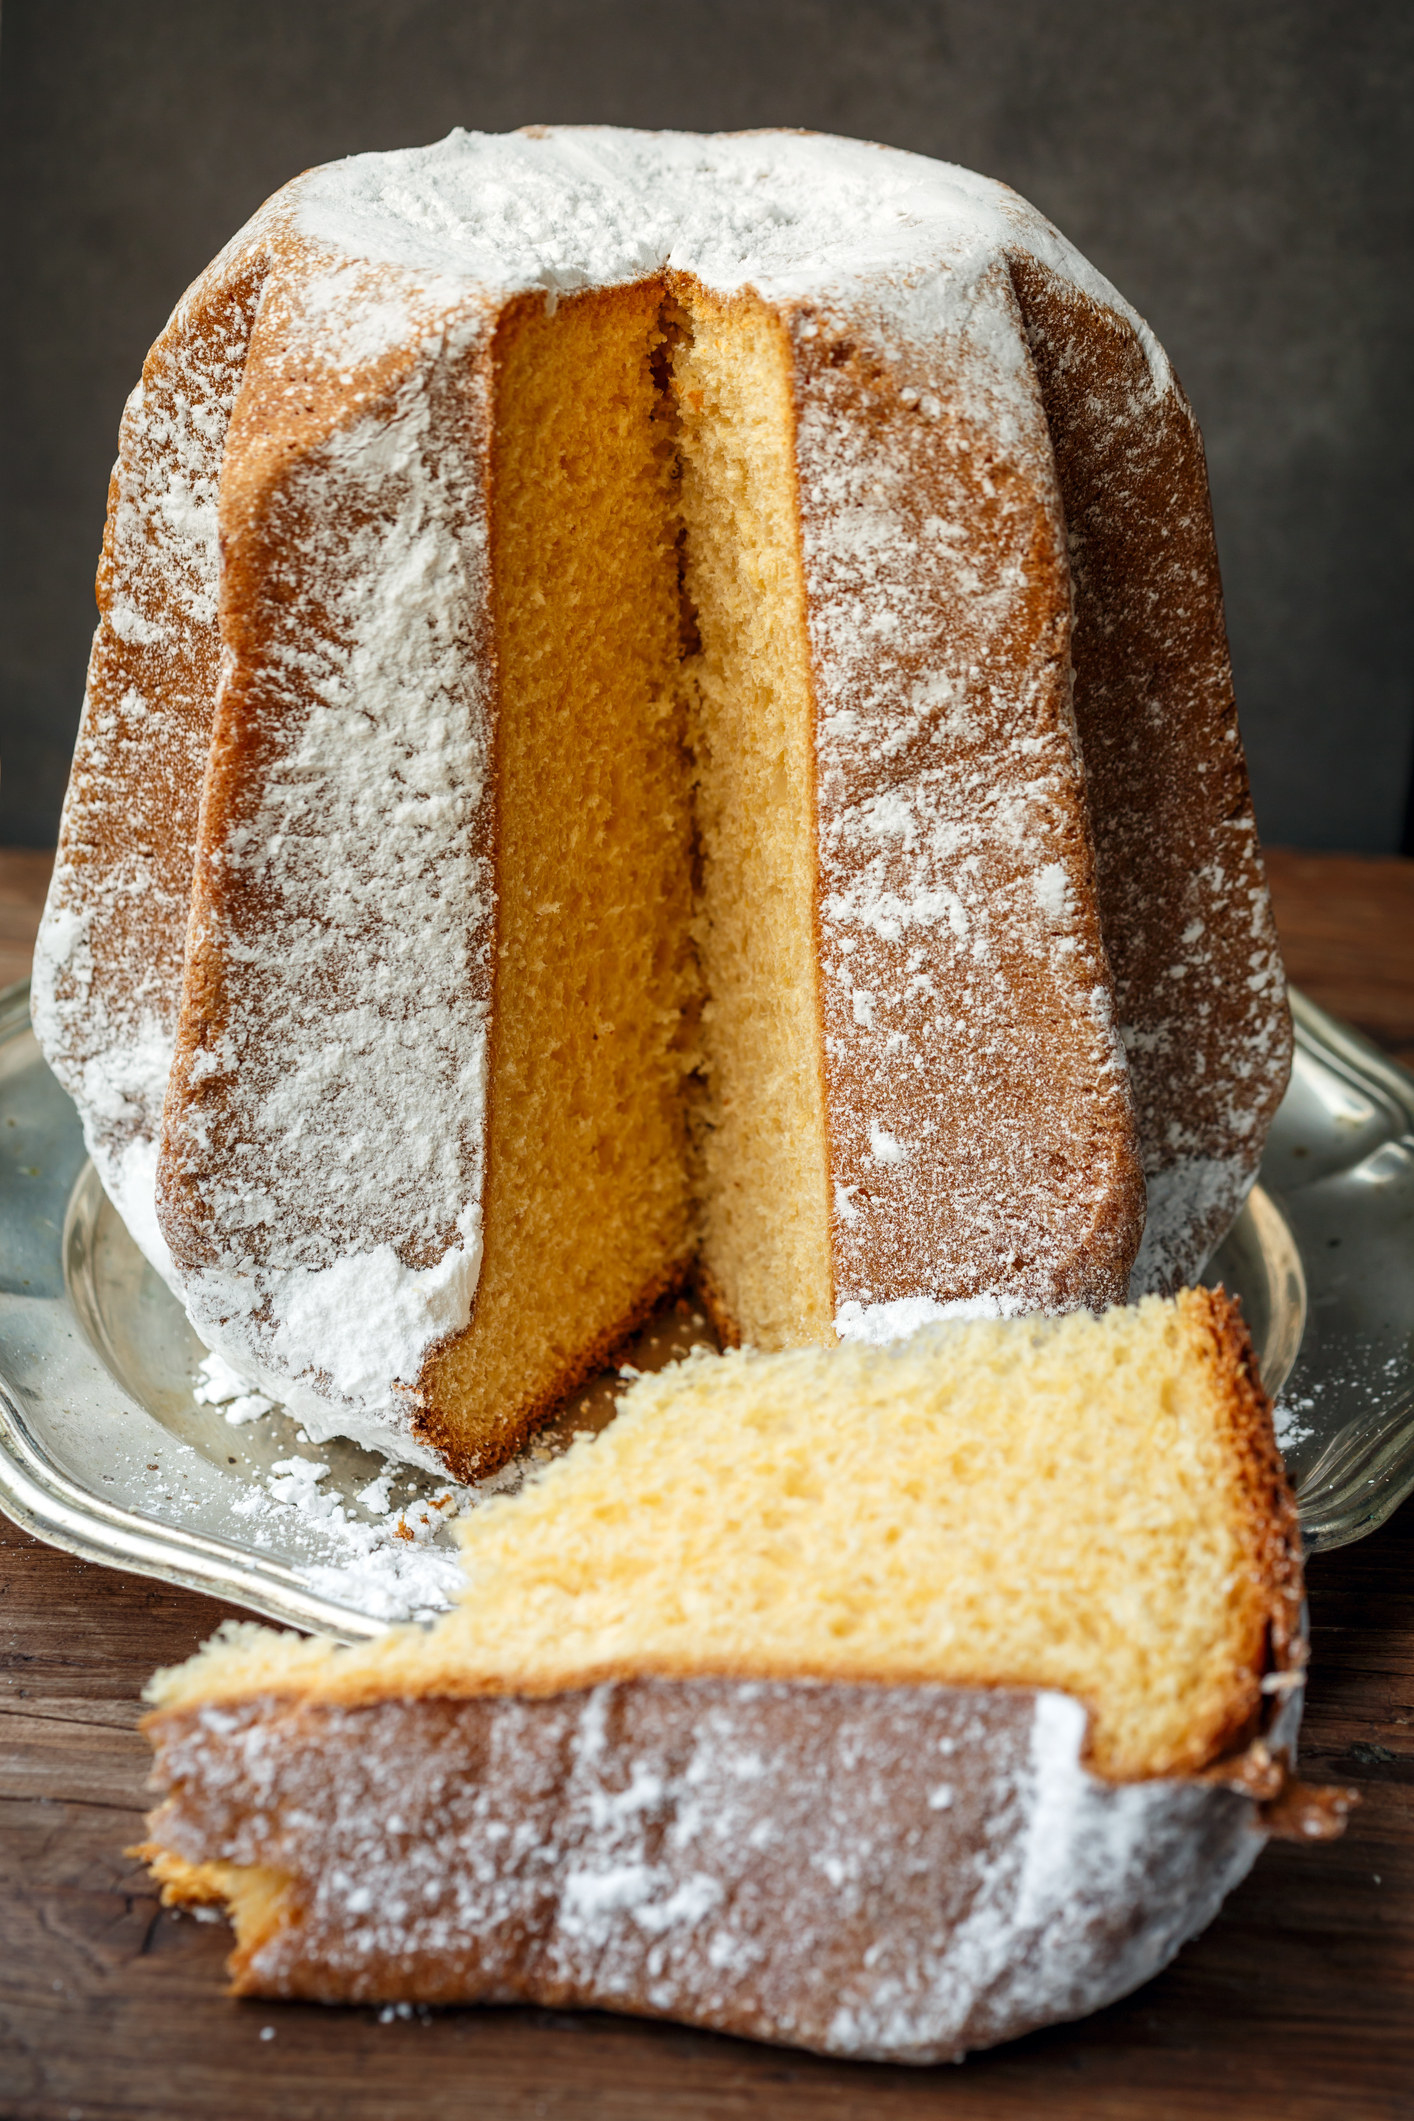 A tall pandoro with a fat slice resting next to it